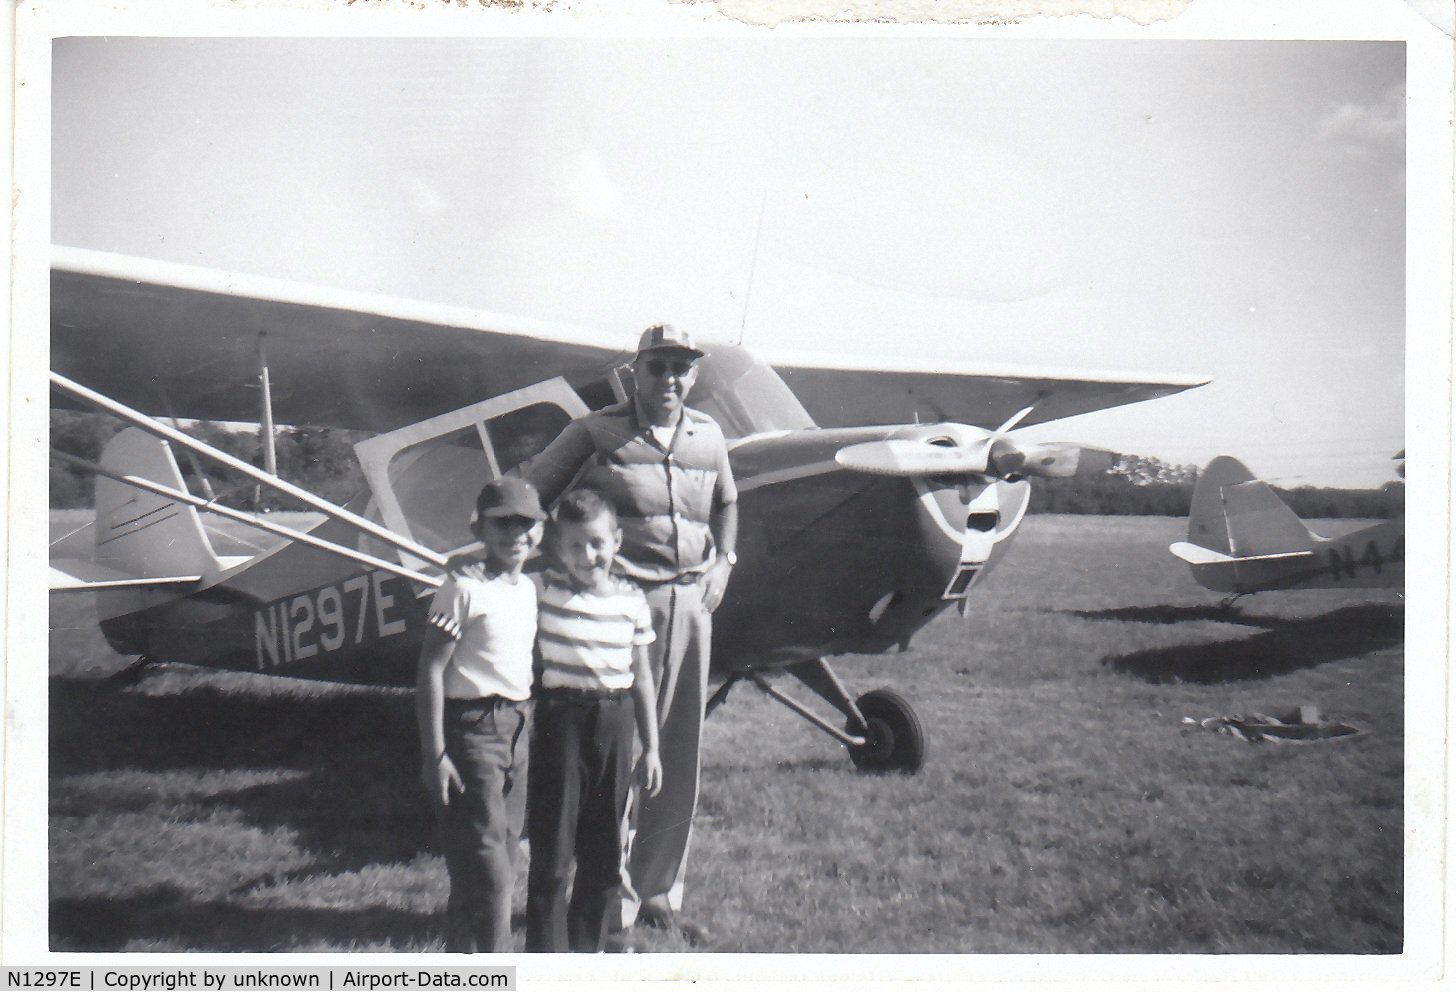 N1297E, 1946 Aeronca 7AC Champion C/N 7AC-4857, This was my Dad's plane back in the early 1960's my brother, myself and dad are in the picture - the photo was taken at an old airfield called Brizee-Harmon field owned at the time by Roy Harmon on Marsh Rd. just outside Rochester, NY